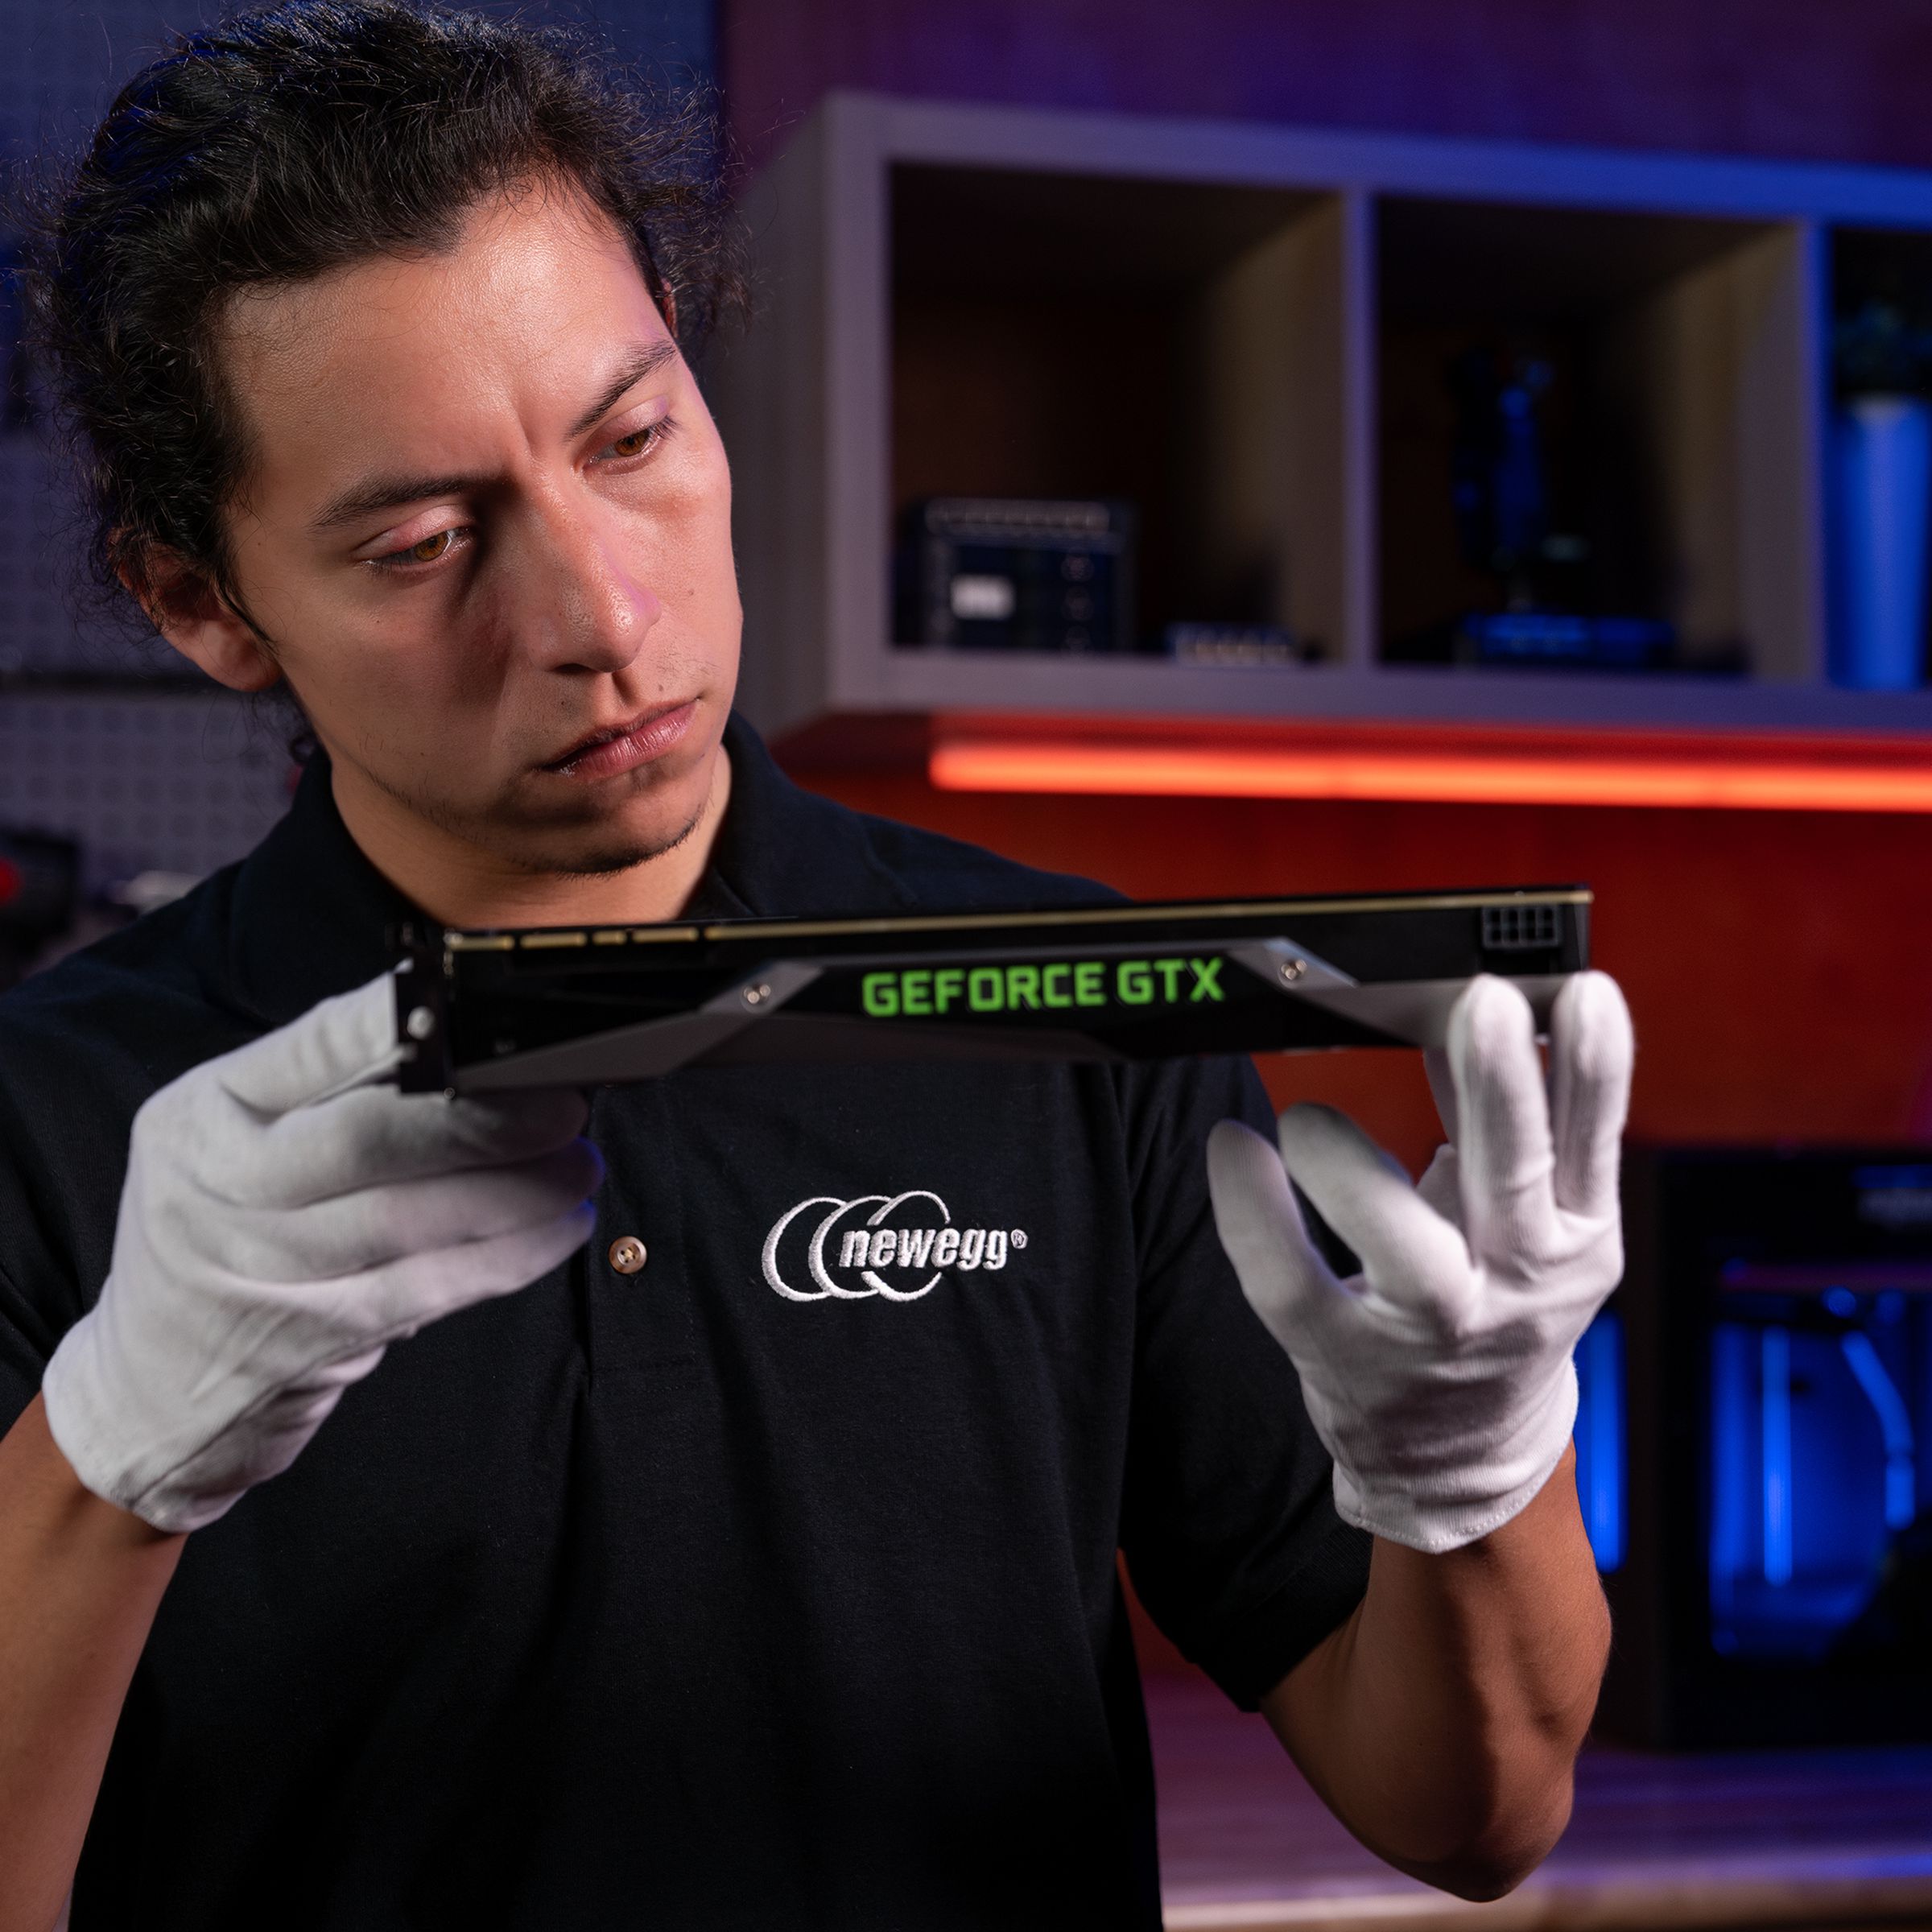 Image of a serious-looking man with black hair and white cotton gloves examining an Nvidia Geforce GTX graphics card. Hey, wait a minute, those aren’t even eligible for this program!